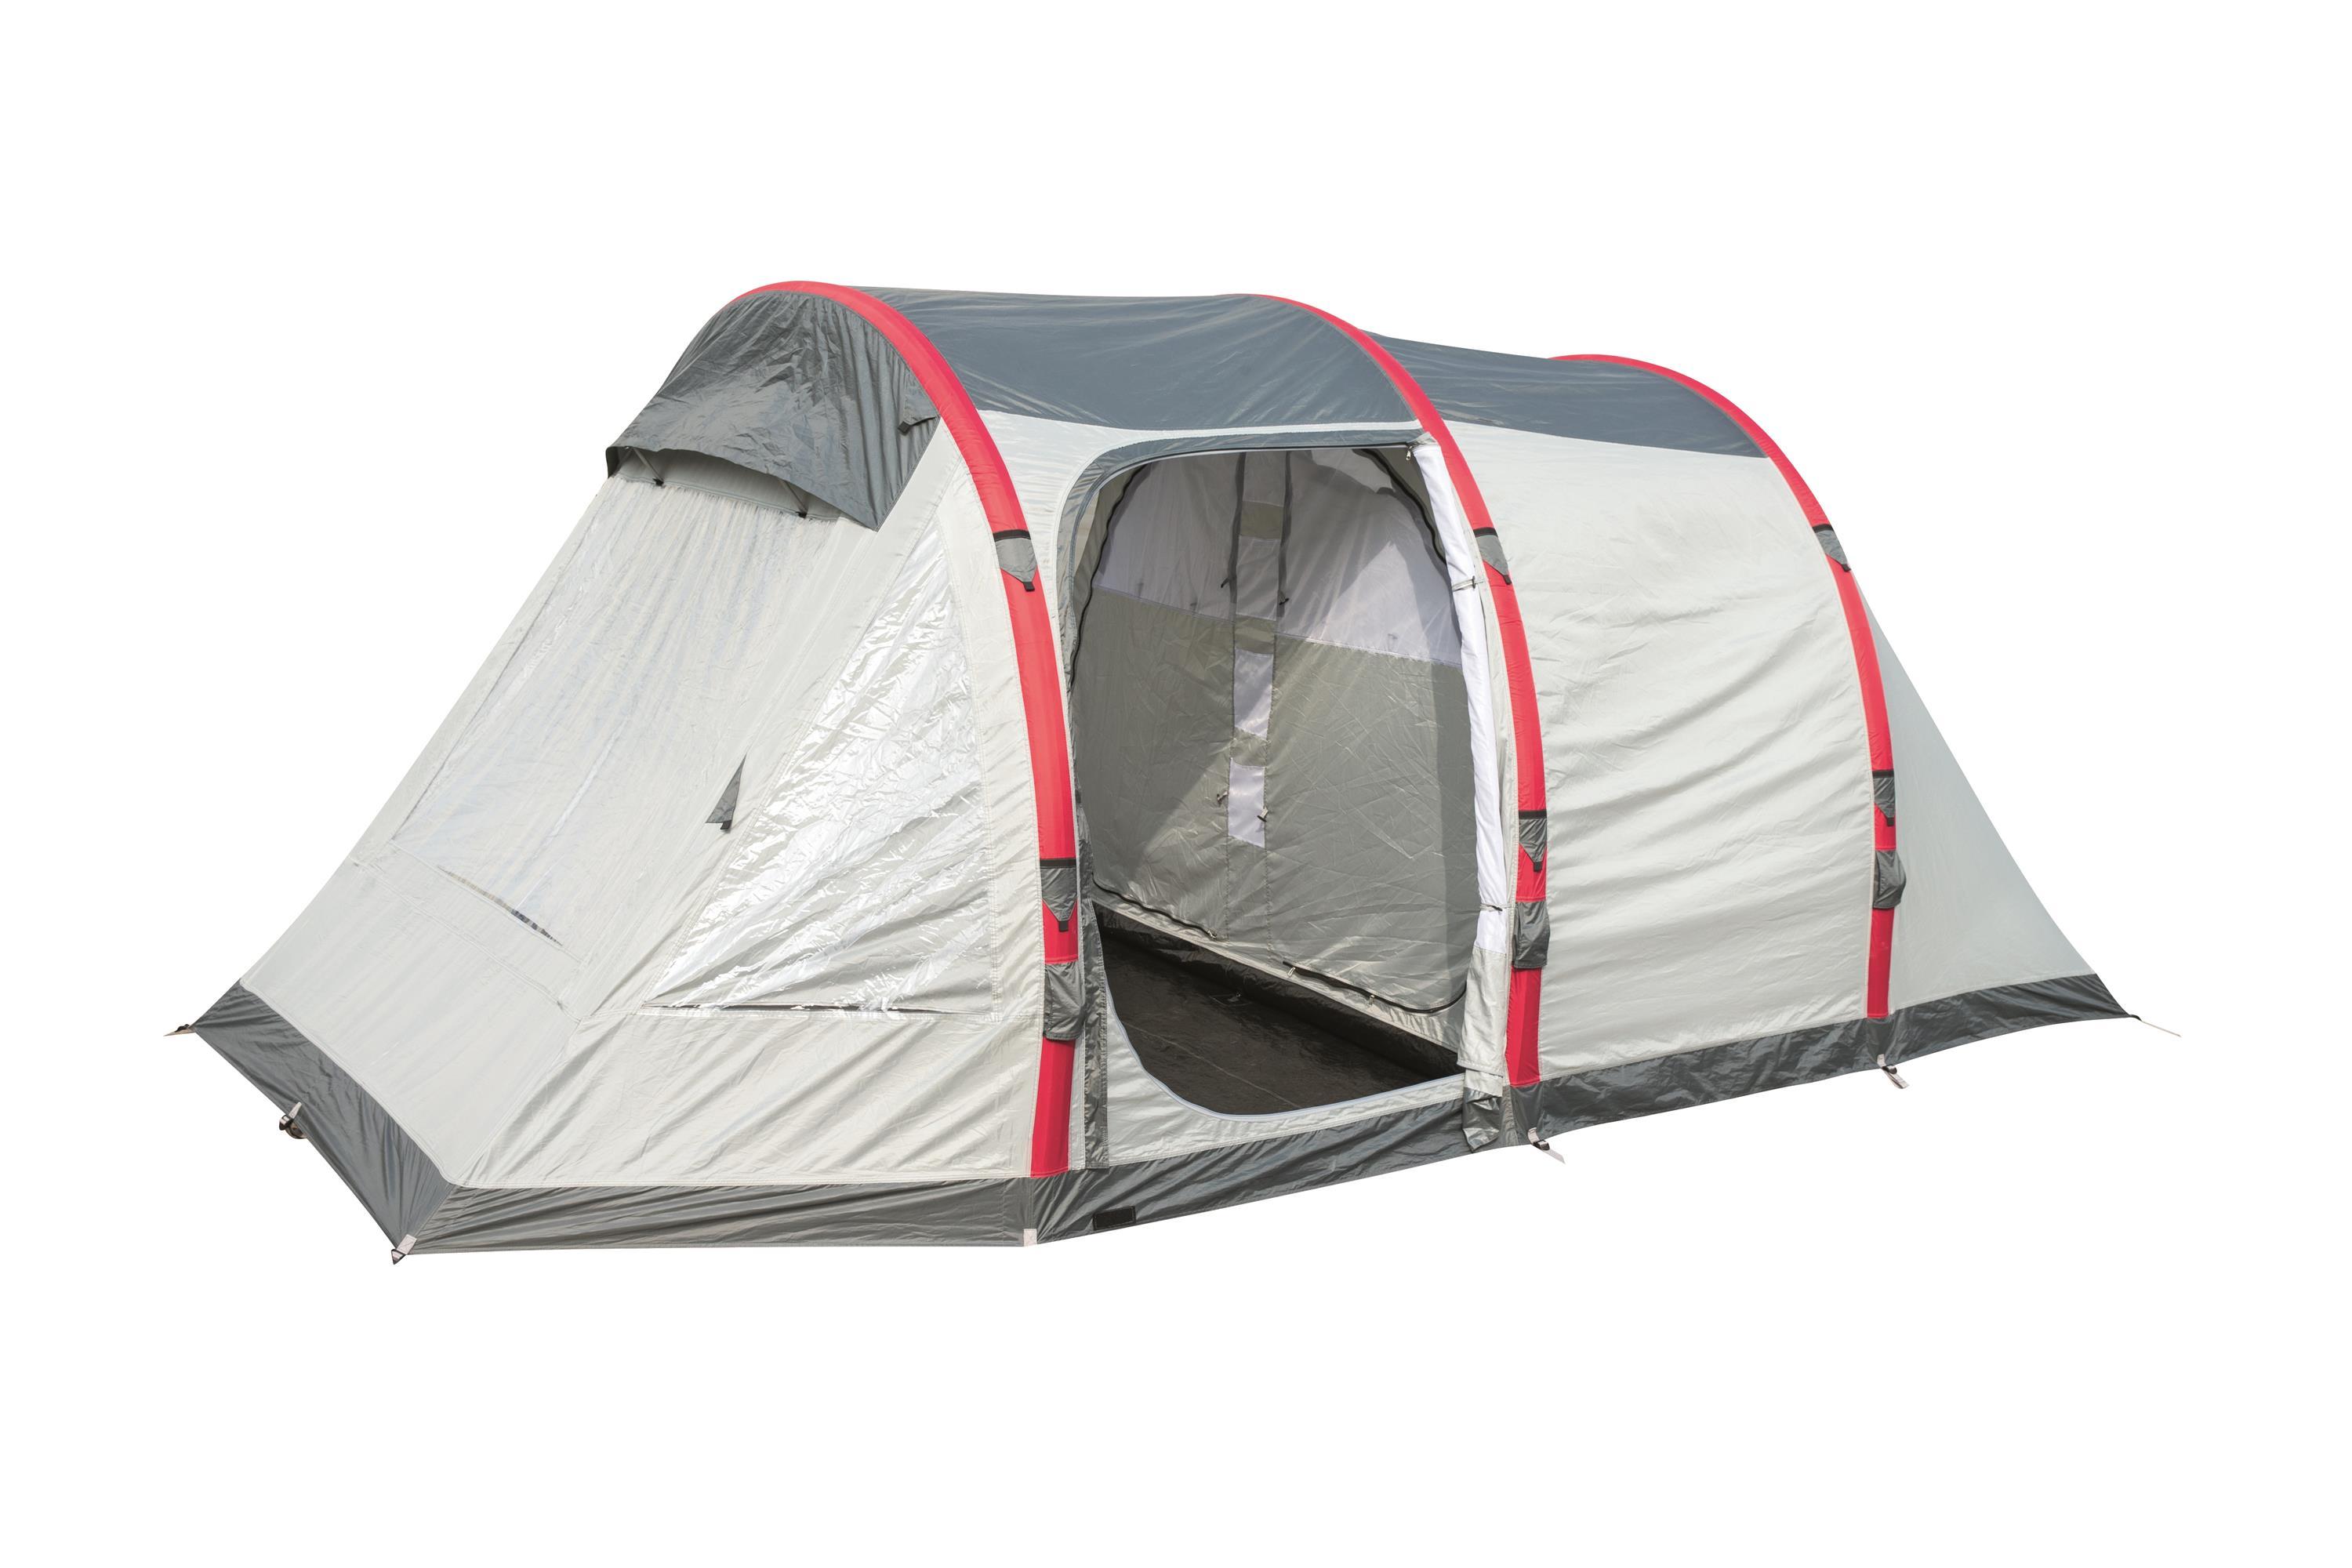 Four-person inflatable tent